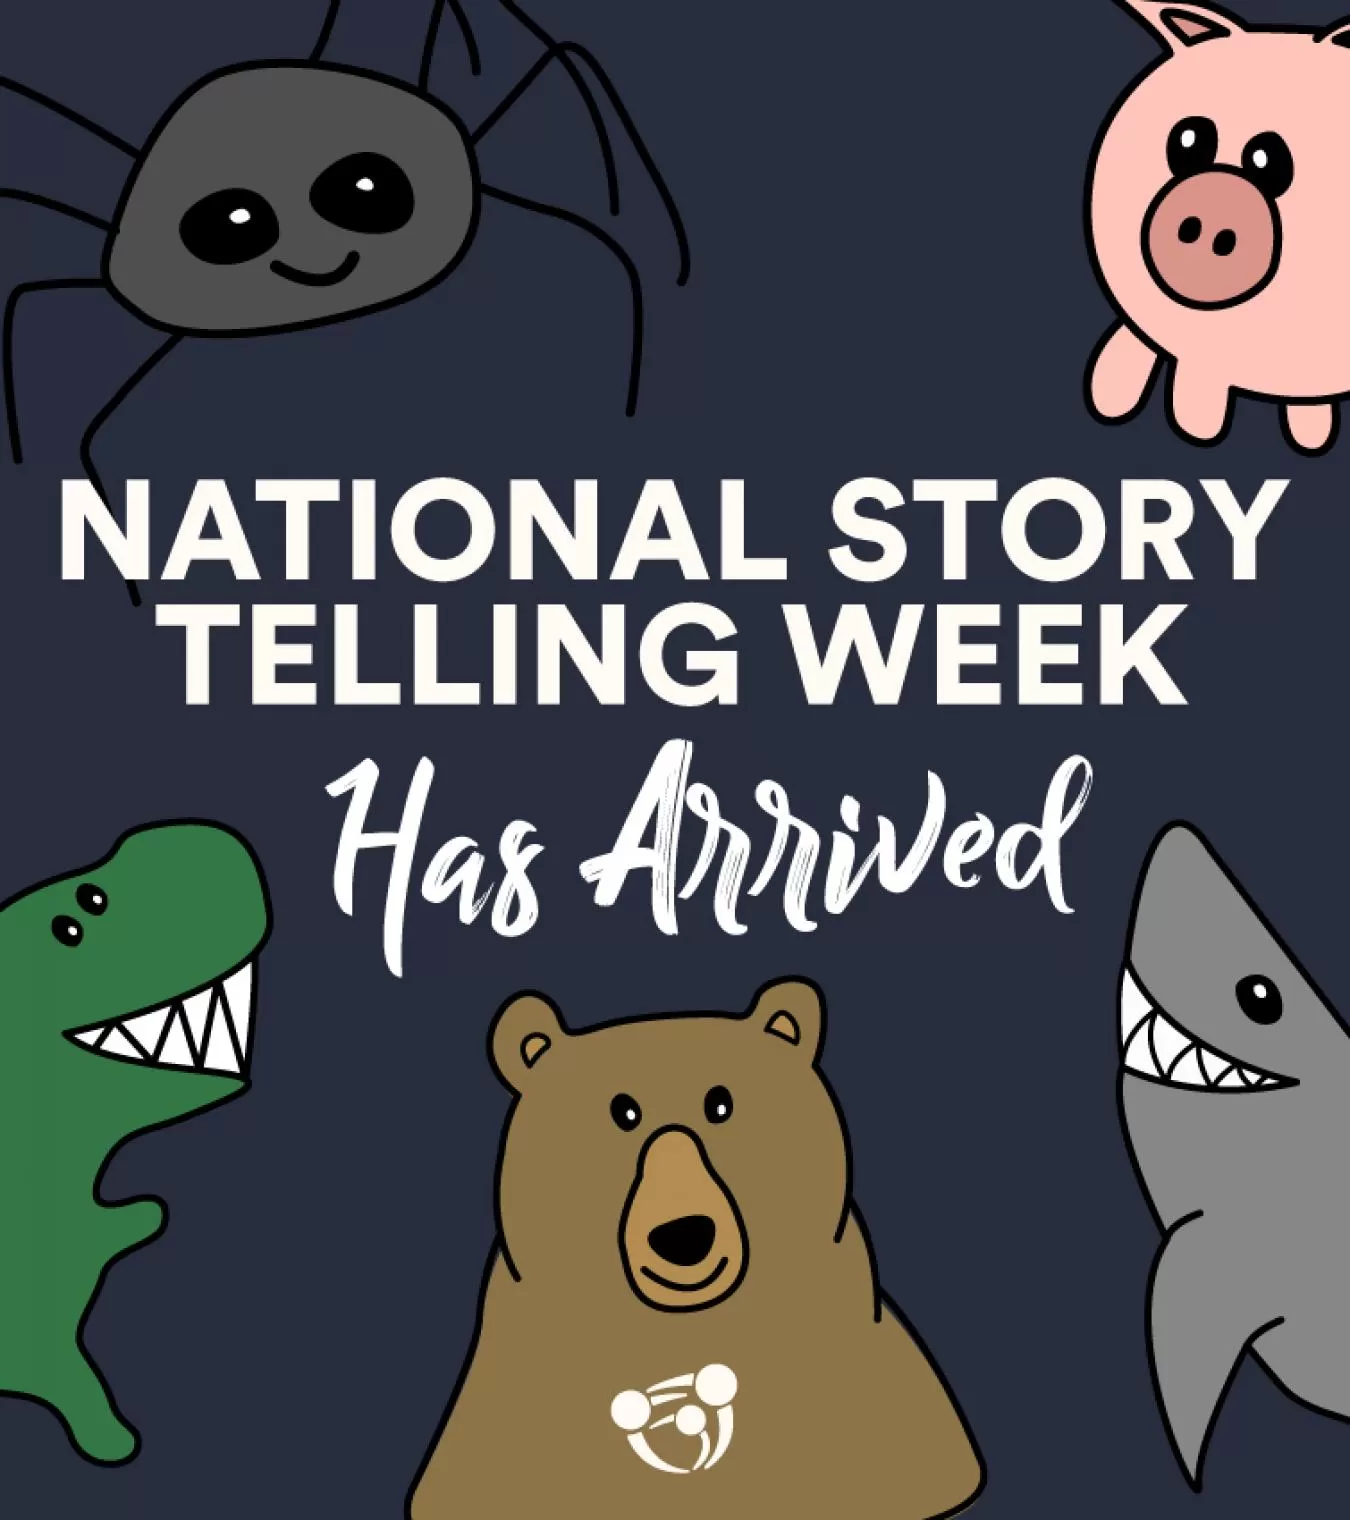 Apprentices Bring Stories to Life for National Storytelling Week